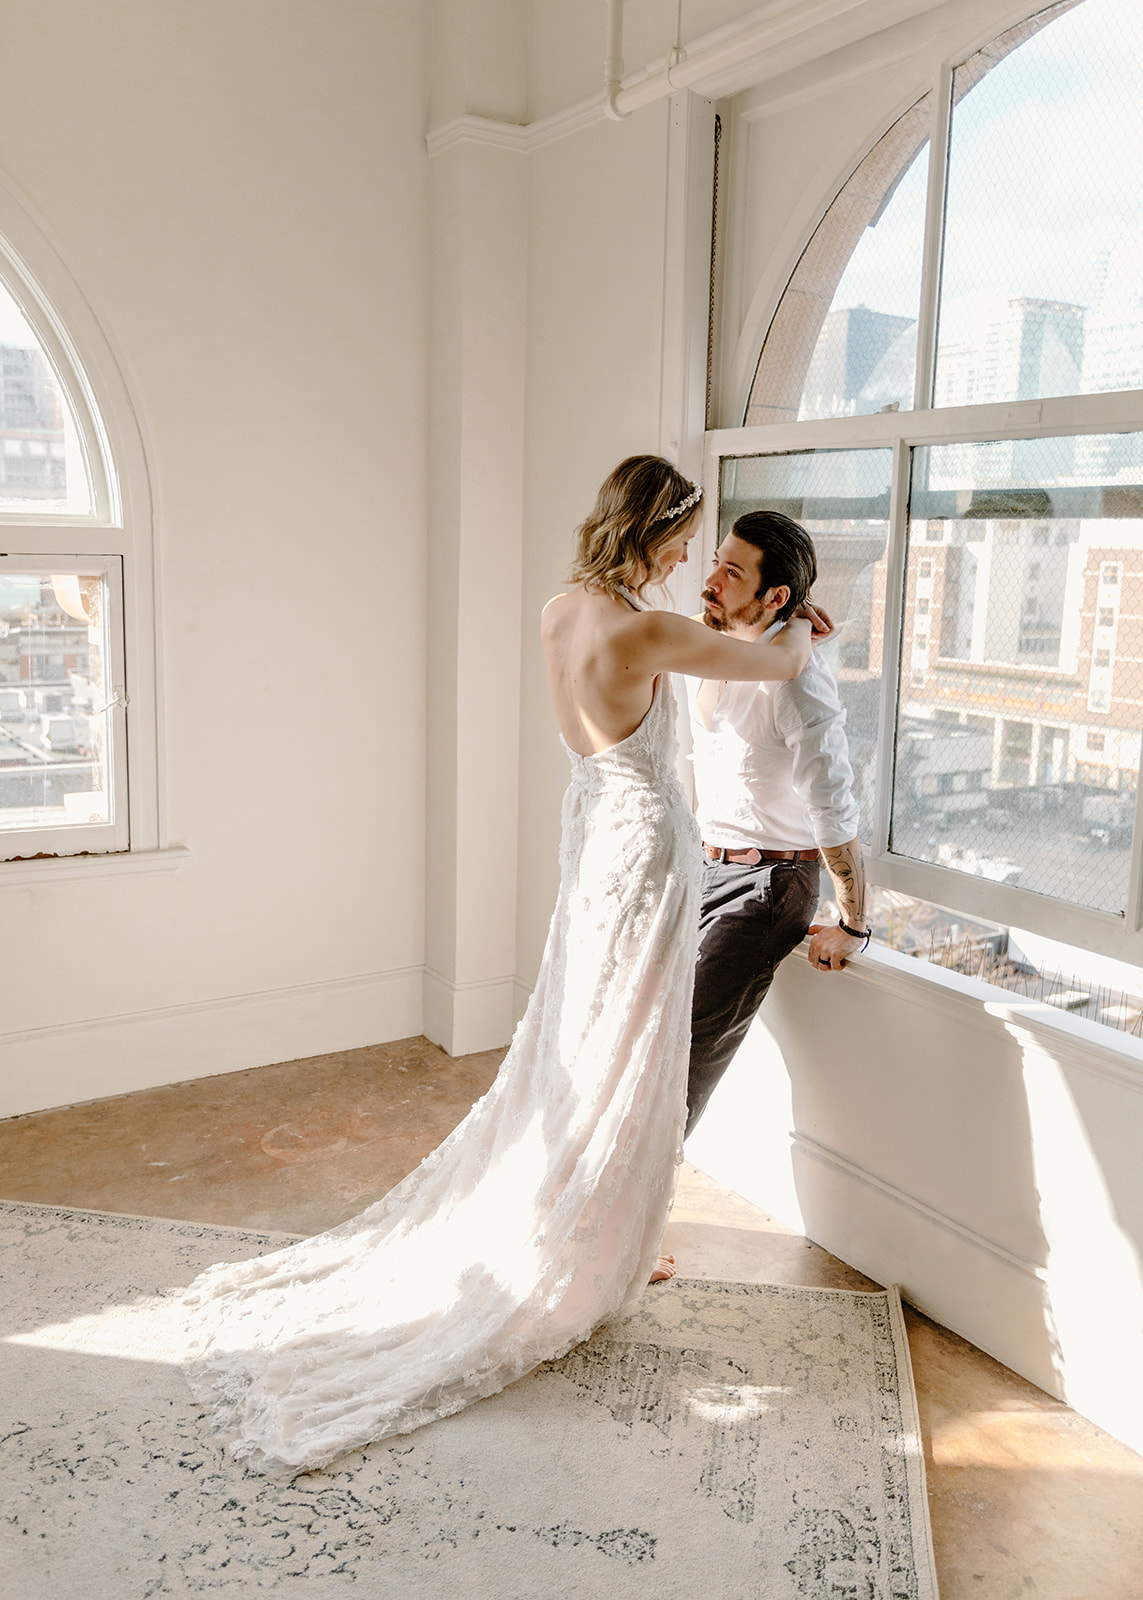 Modern Gastown elopement inspiration with a bride and groom